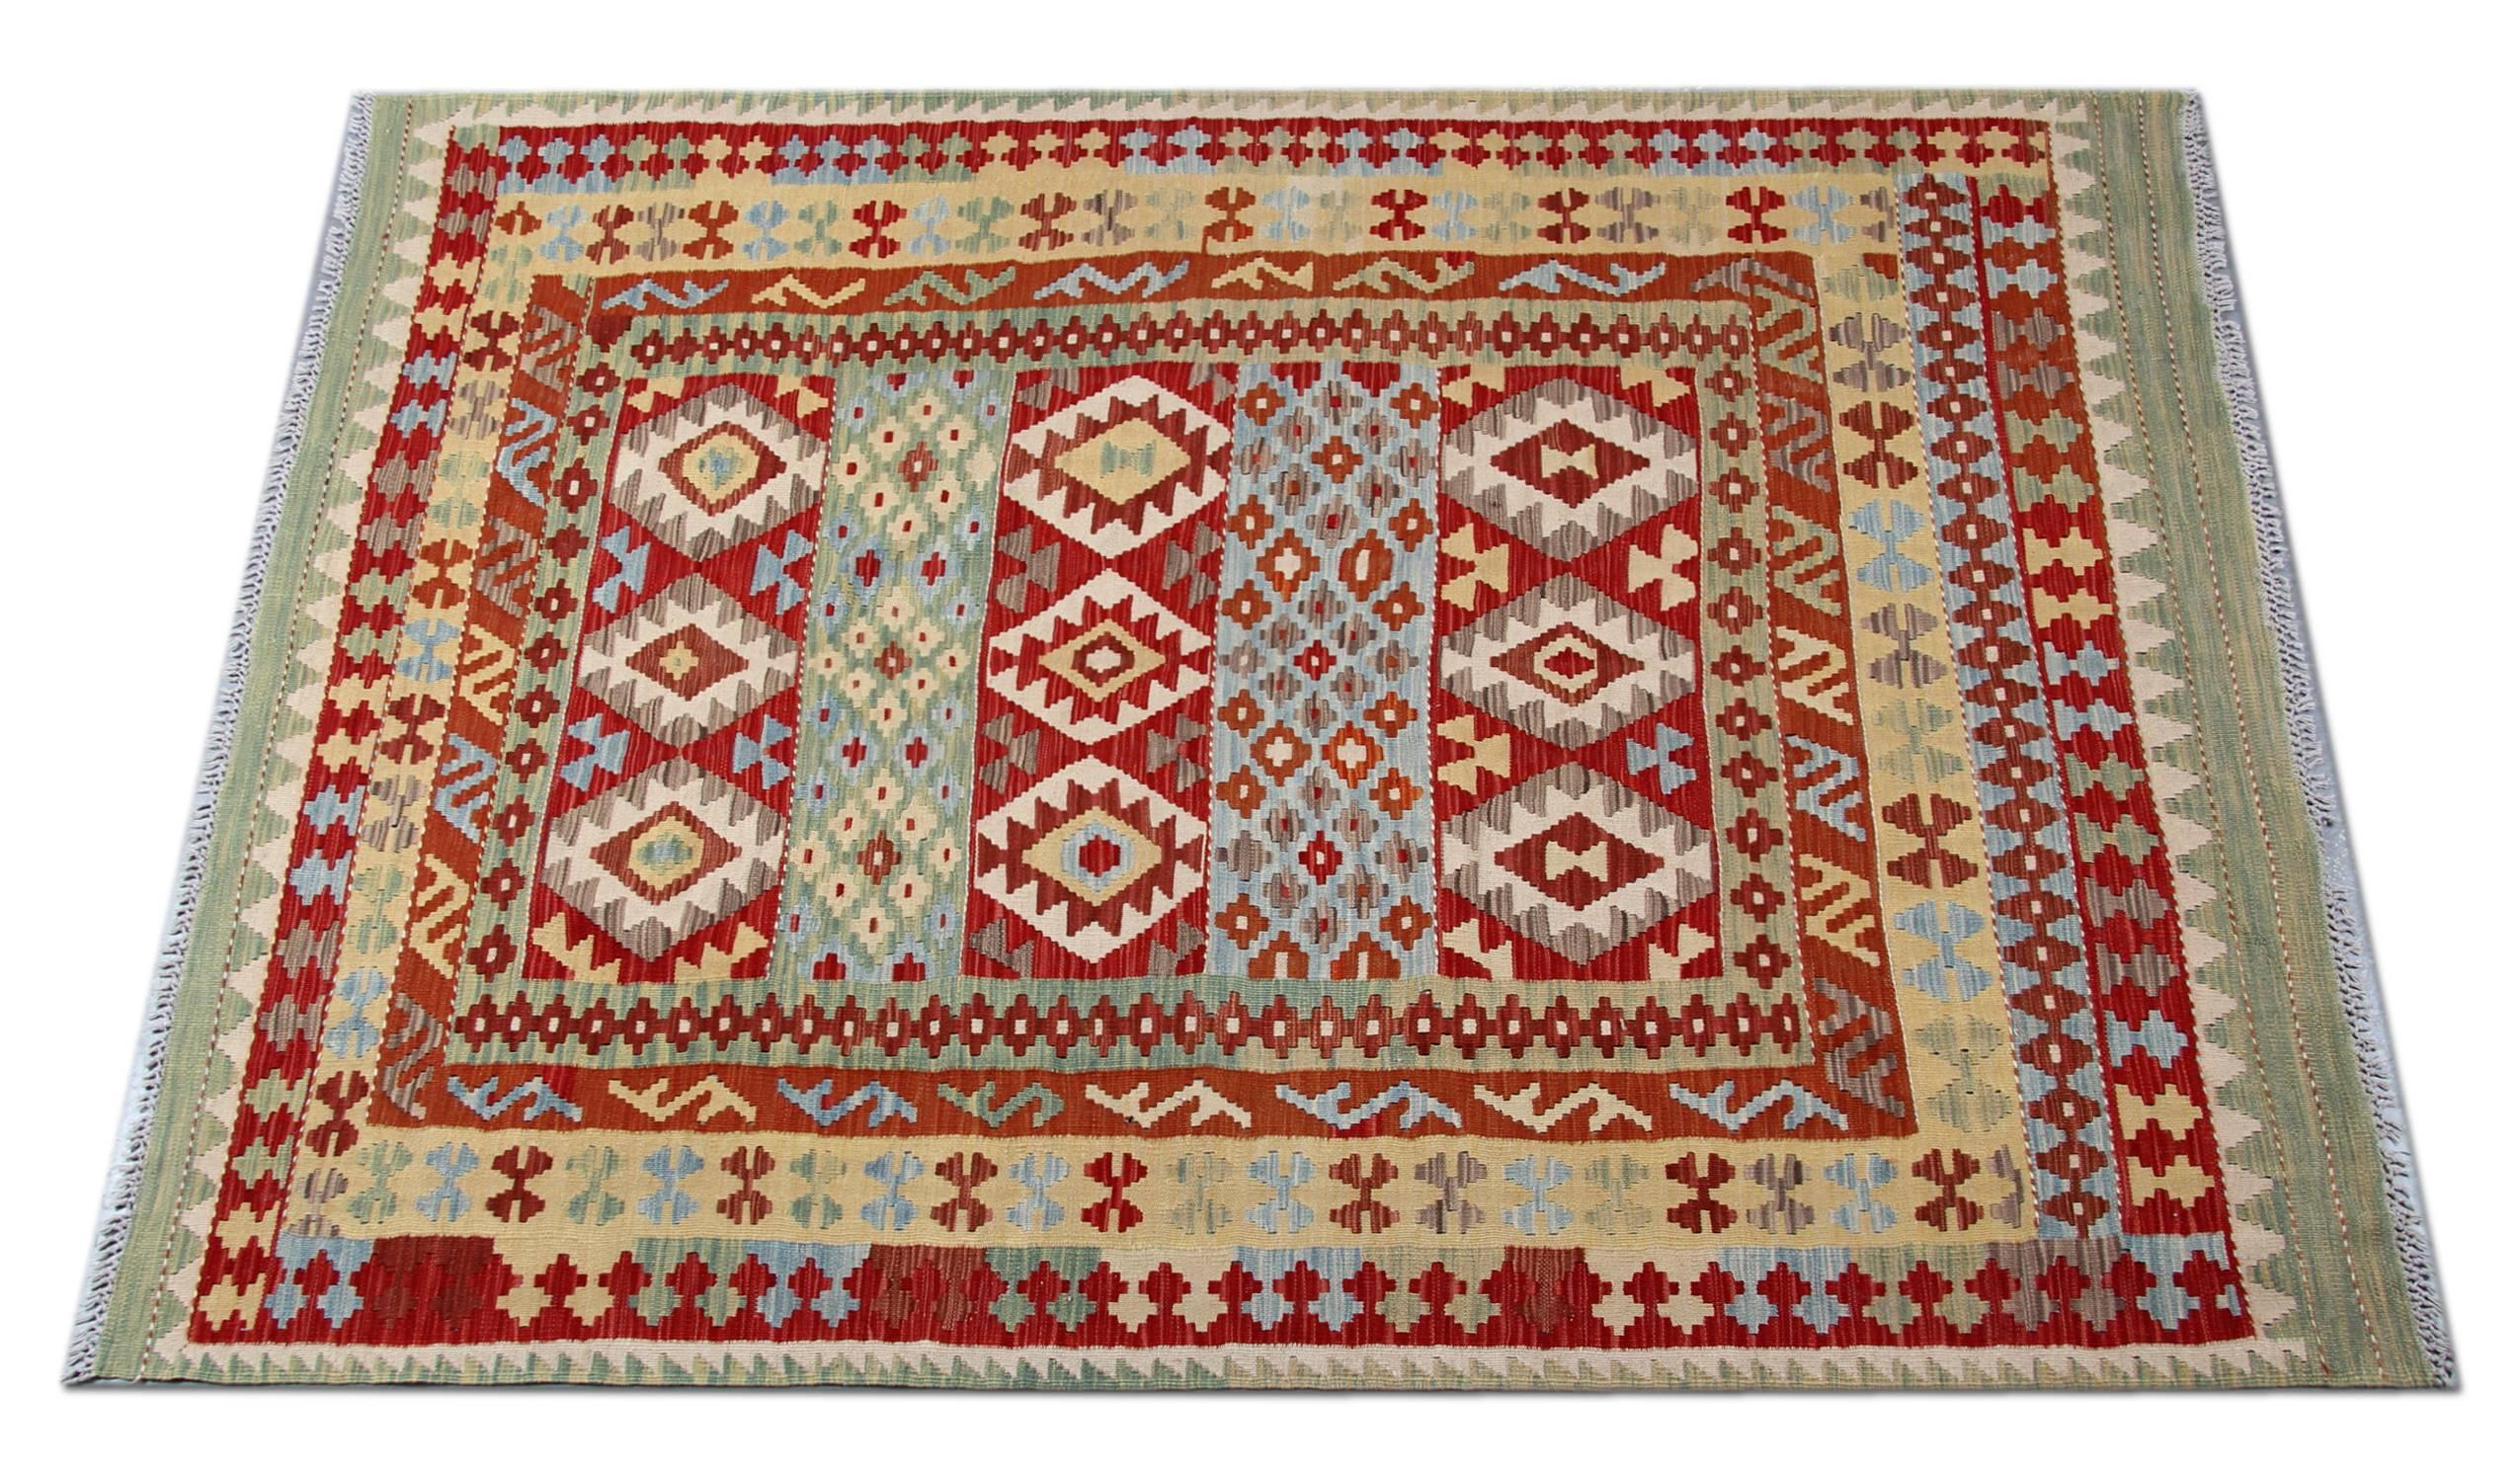 This tribal rug is a Kilim which derives from Uzbek and Turkman tribes. The flat weave rug is completely handmade by using the best wool and cotton. In addition, only organic dyes have been used for the production of this red rug. The designs derive